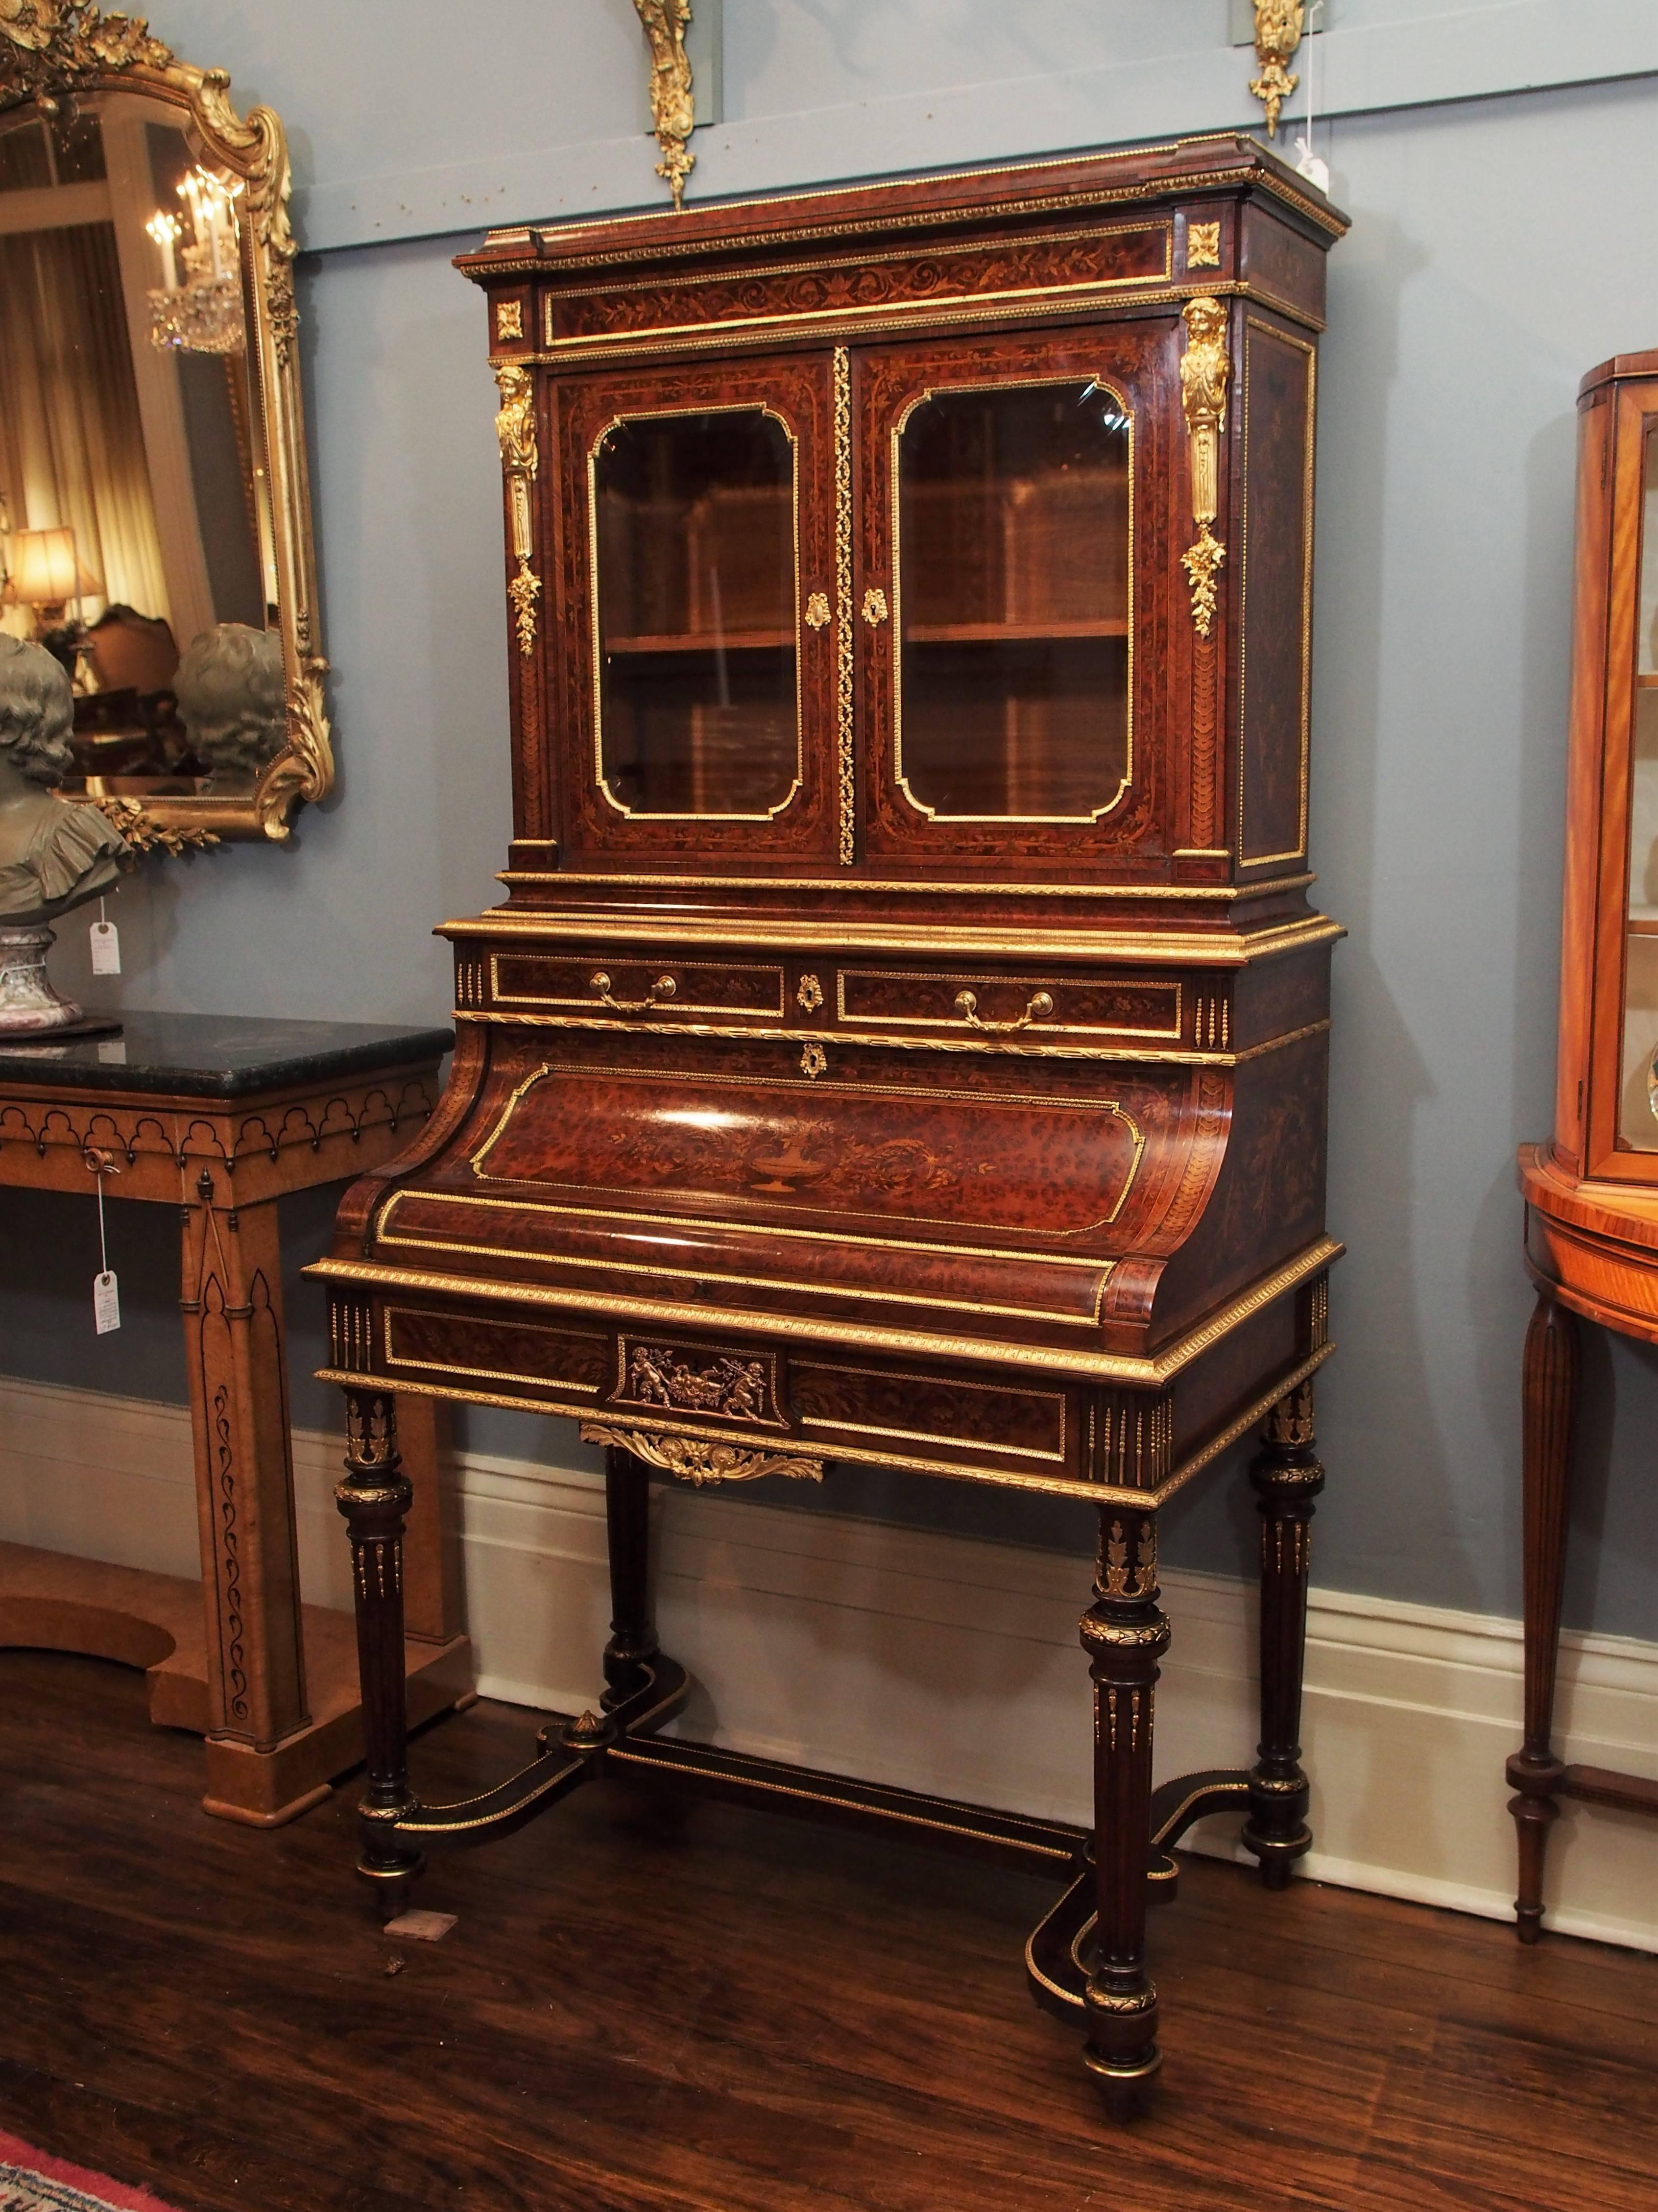 Antique Napoleon III desk and bookcase, circa 1860-1870. This museum quality antique has fine briarwood and wonderful ormolu throughout.